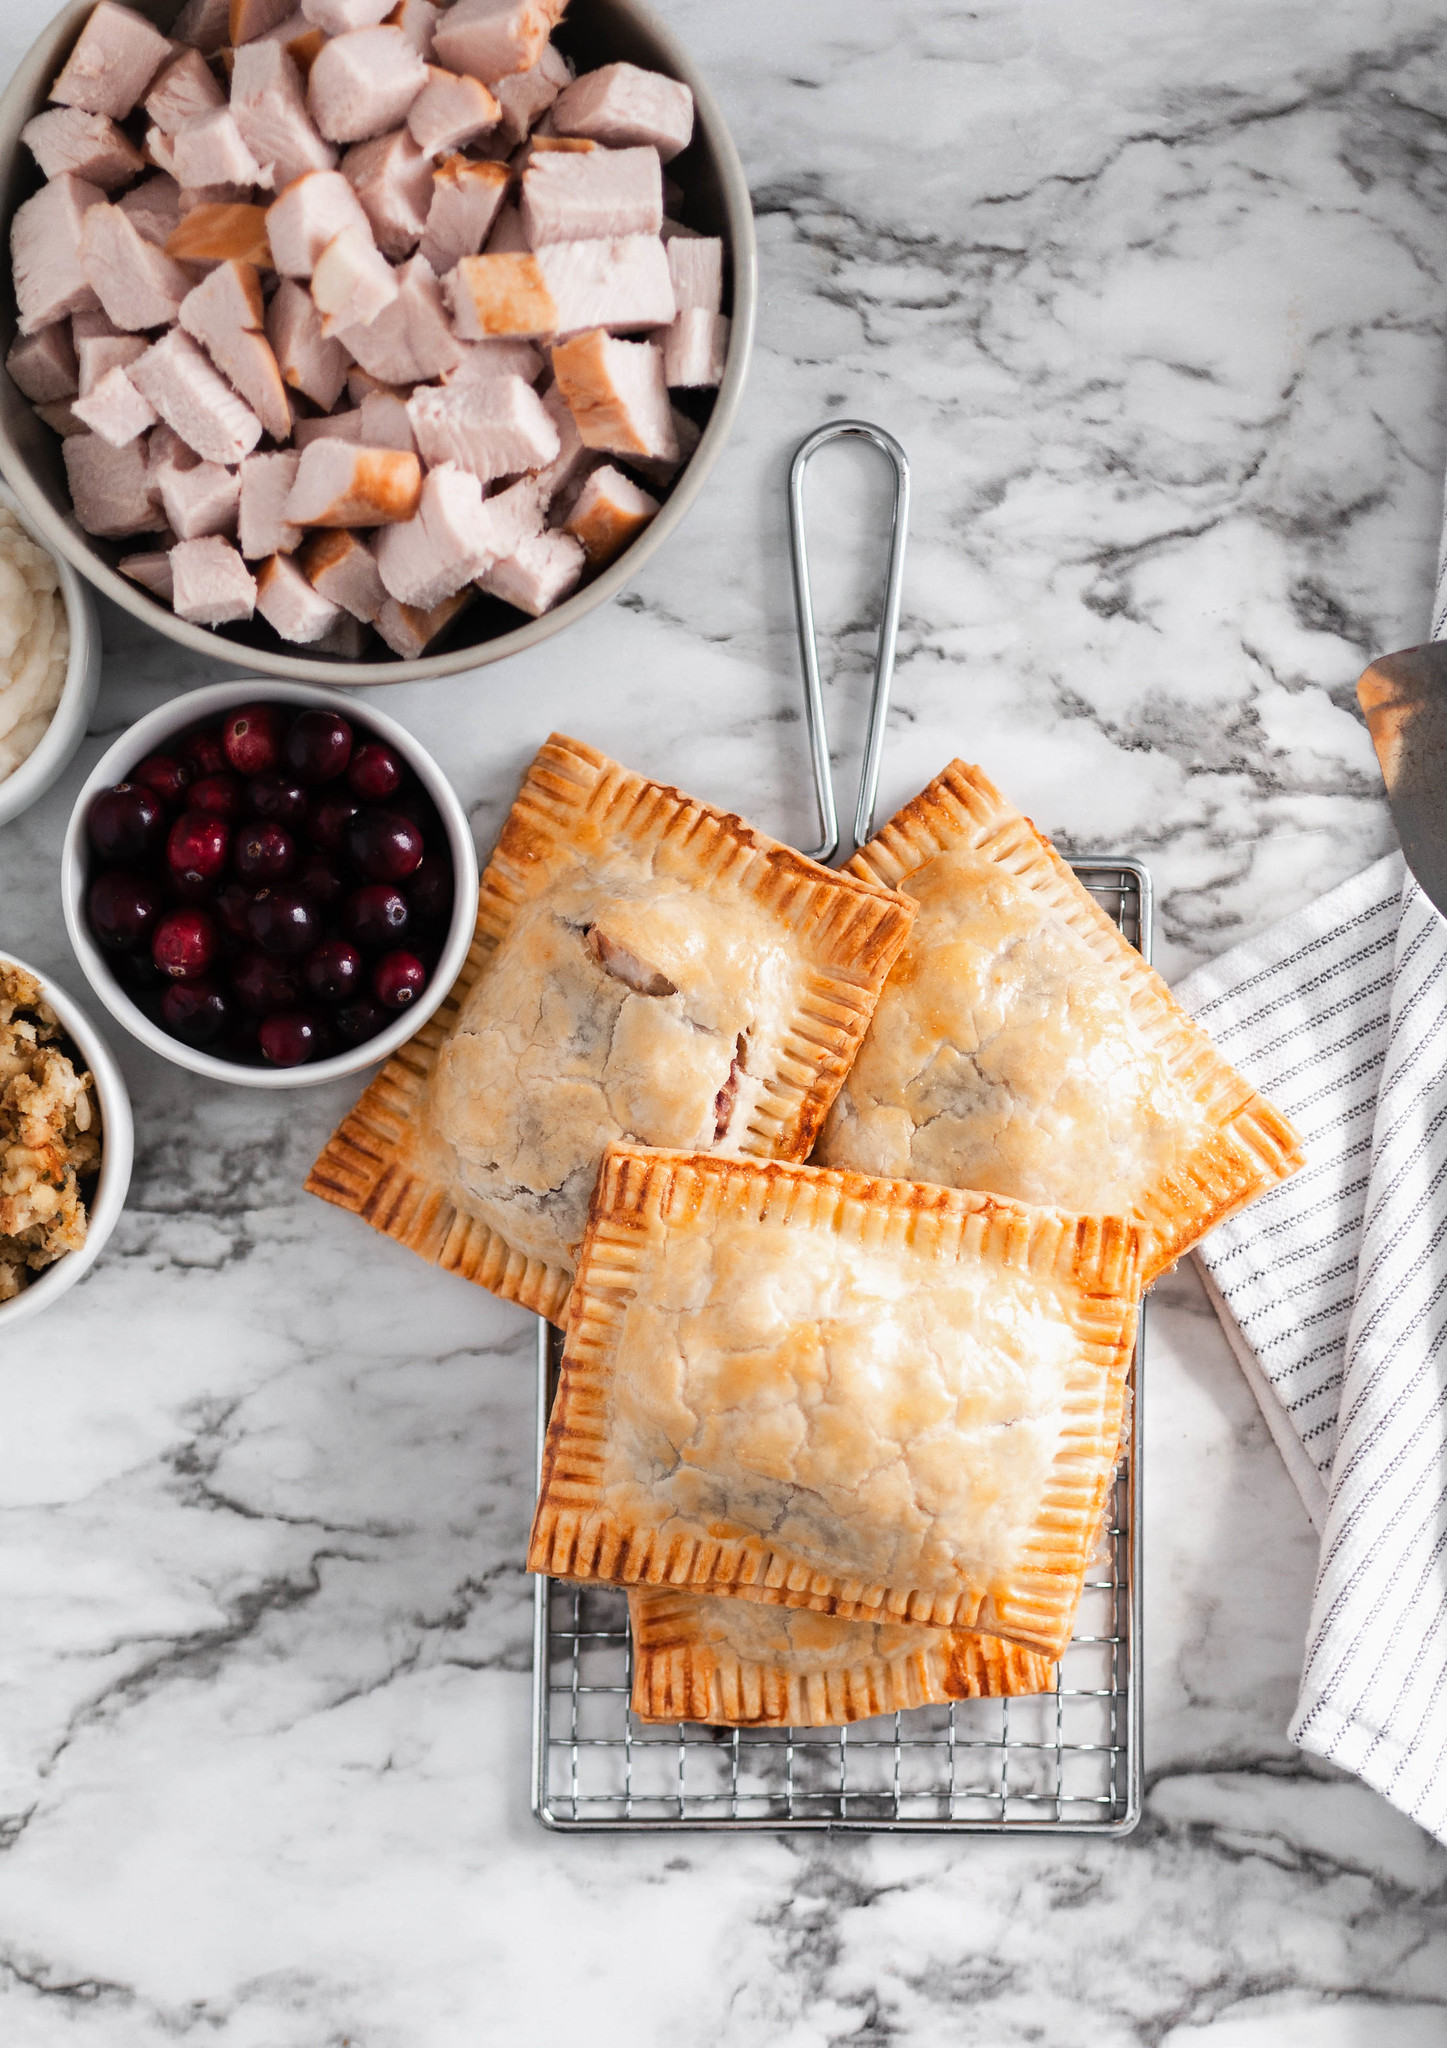 Repurpose your delicious Thanksgiving leftovers and make these Thanksgiving Leftovers Hot Pockets. I've teamed up with the National Turkey Federation to bring you a turkey-licious recipe that you'll love this fall and all year long. Mashed potatoes, stuffing, cranberry sauce and turkey cooked in flaky pie dough to golden perfection.